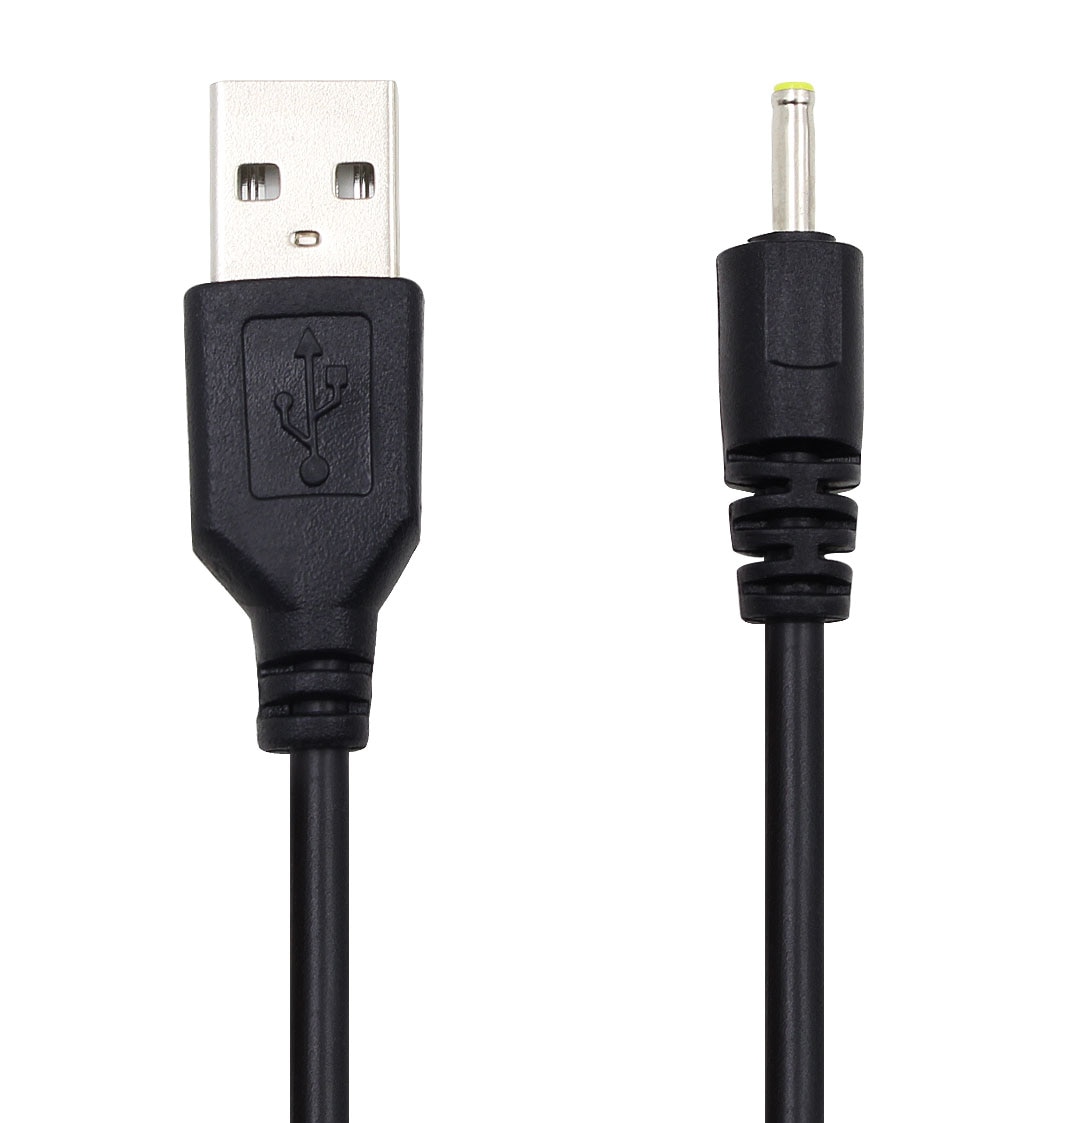 USB DC Poewer Charger Cable Koord Voor Hannspree Hannspad HSG1279 10.1 "Tablet